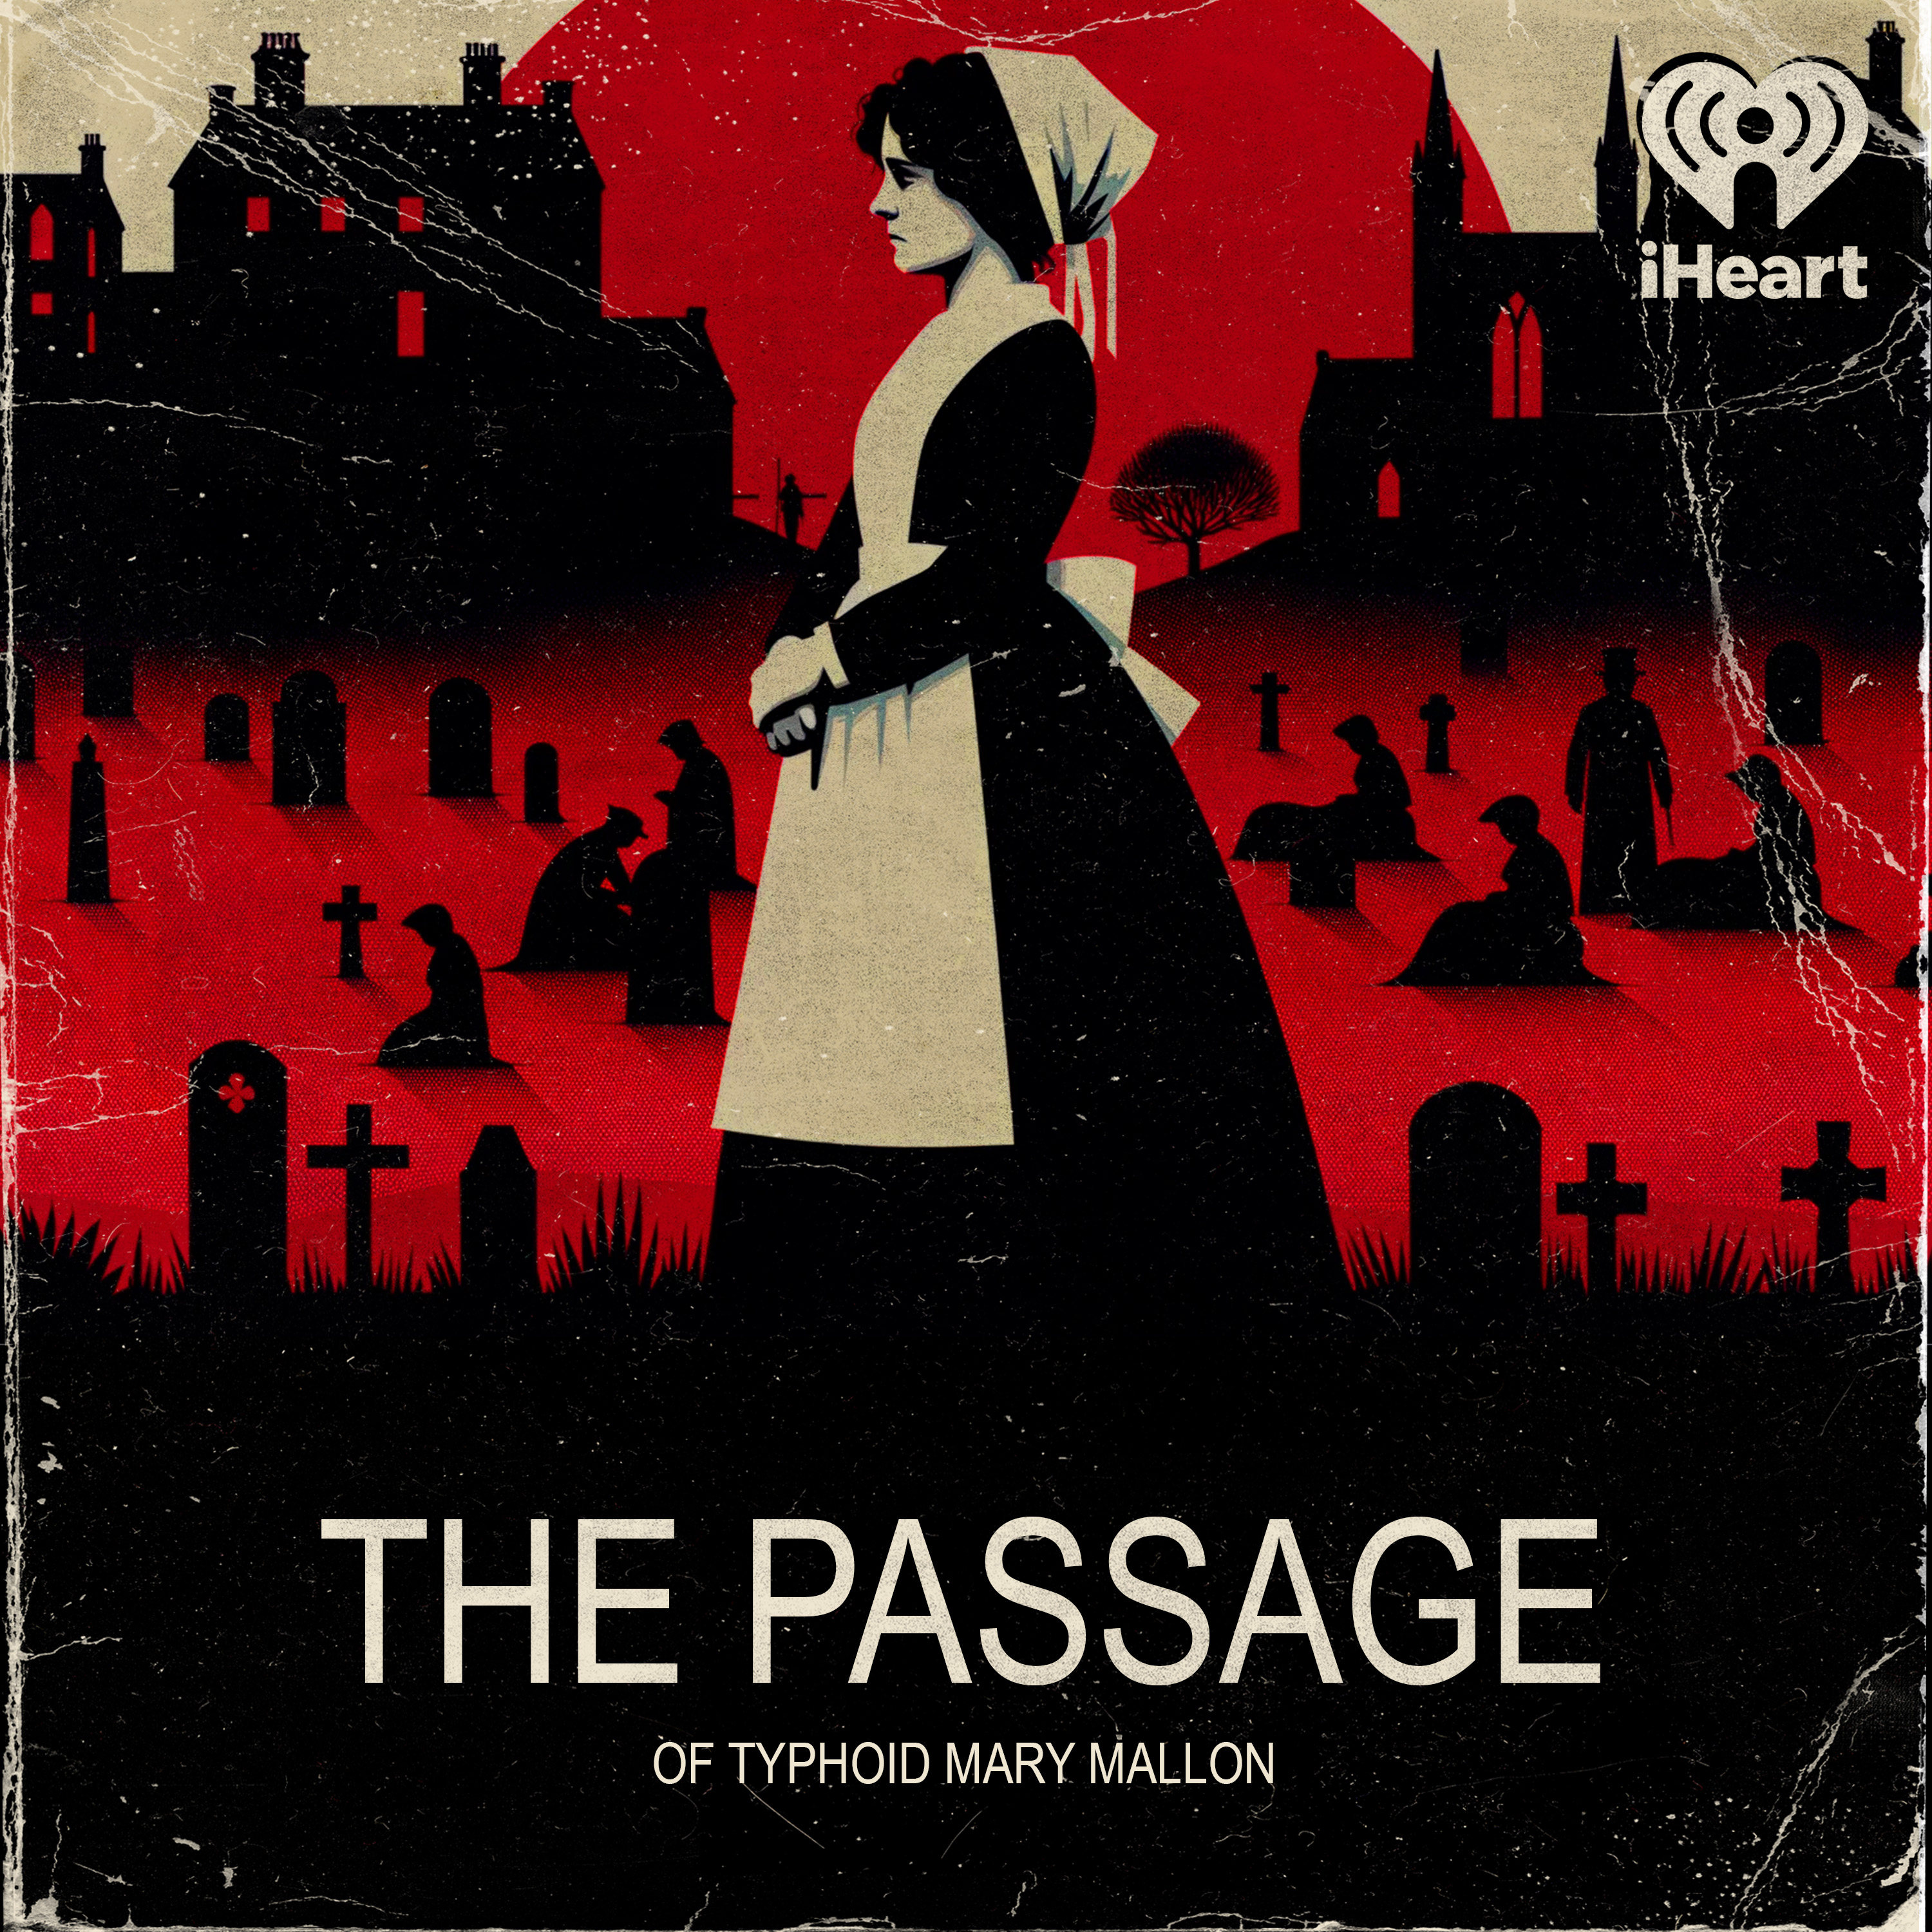 Episode 12: THE PASSAGE OF TYPHOID MARY